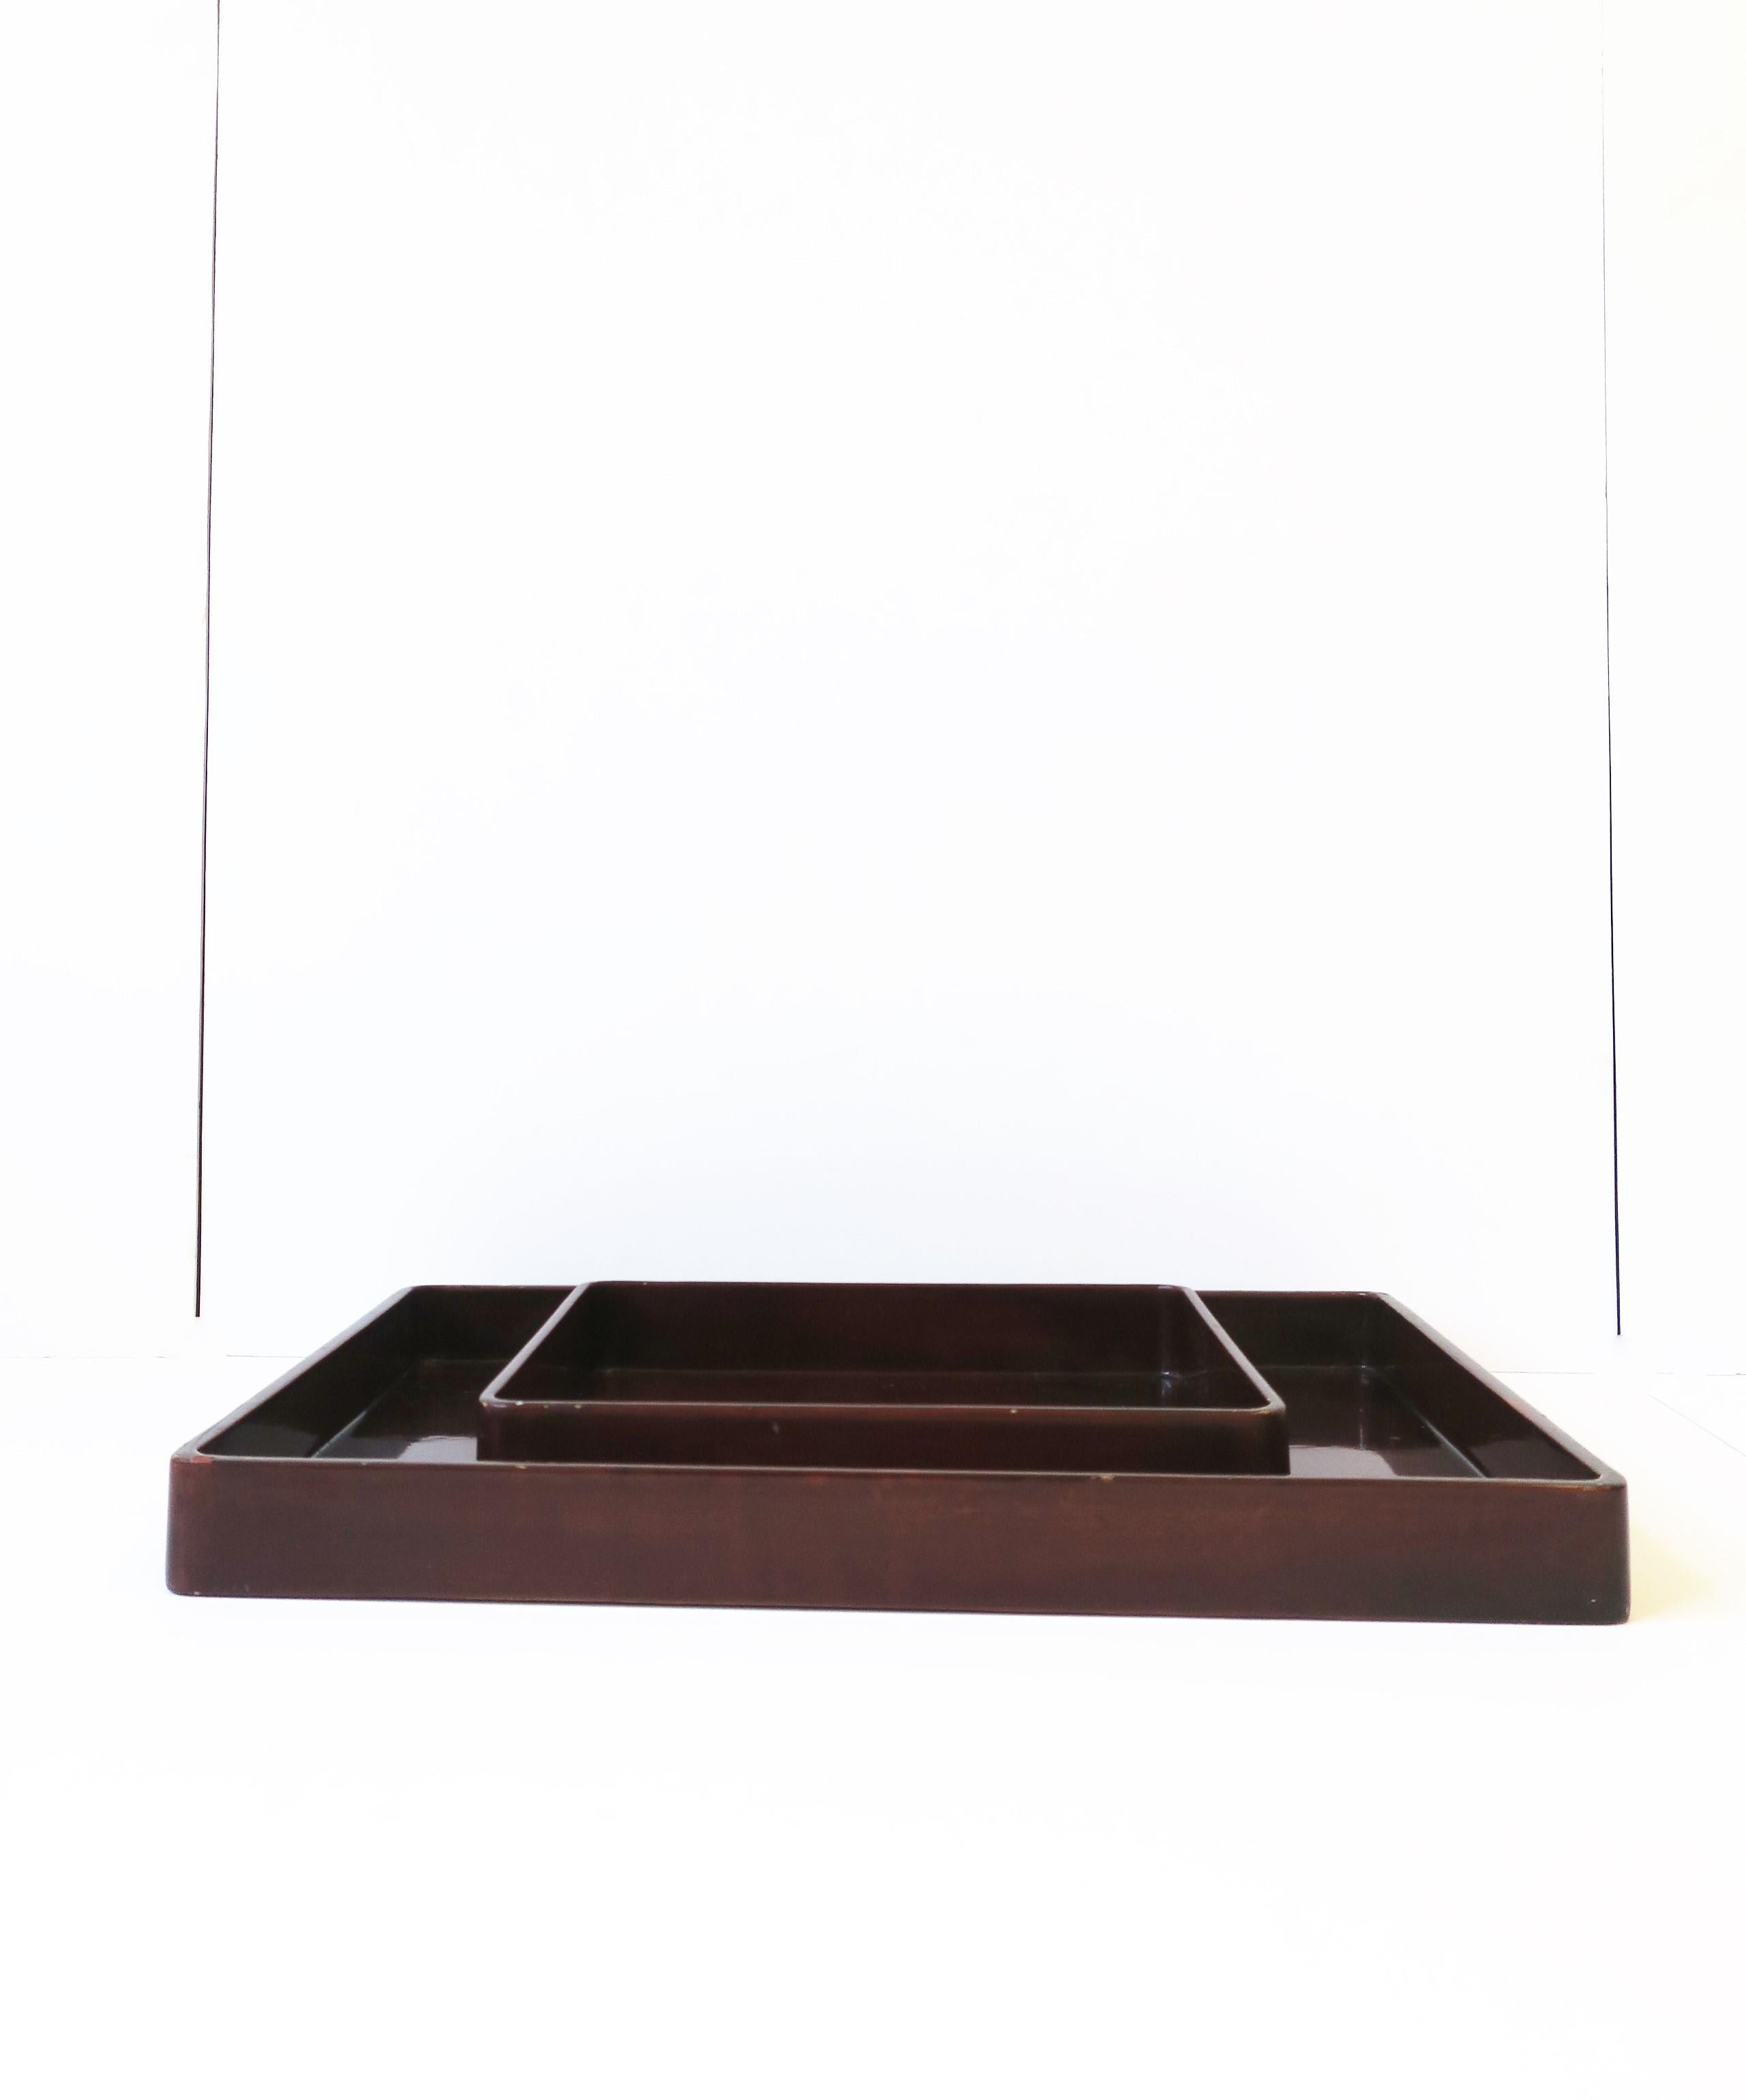 Red Burgundy Lacquer Serving Tray by Designer Rae Kasian, Square 3